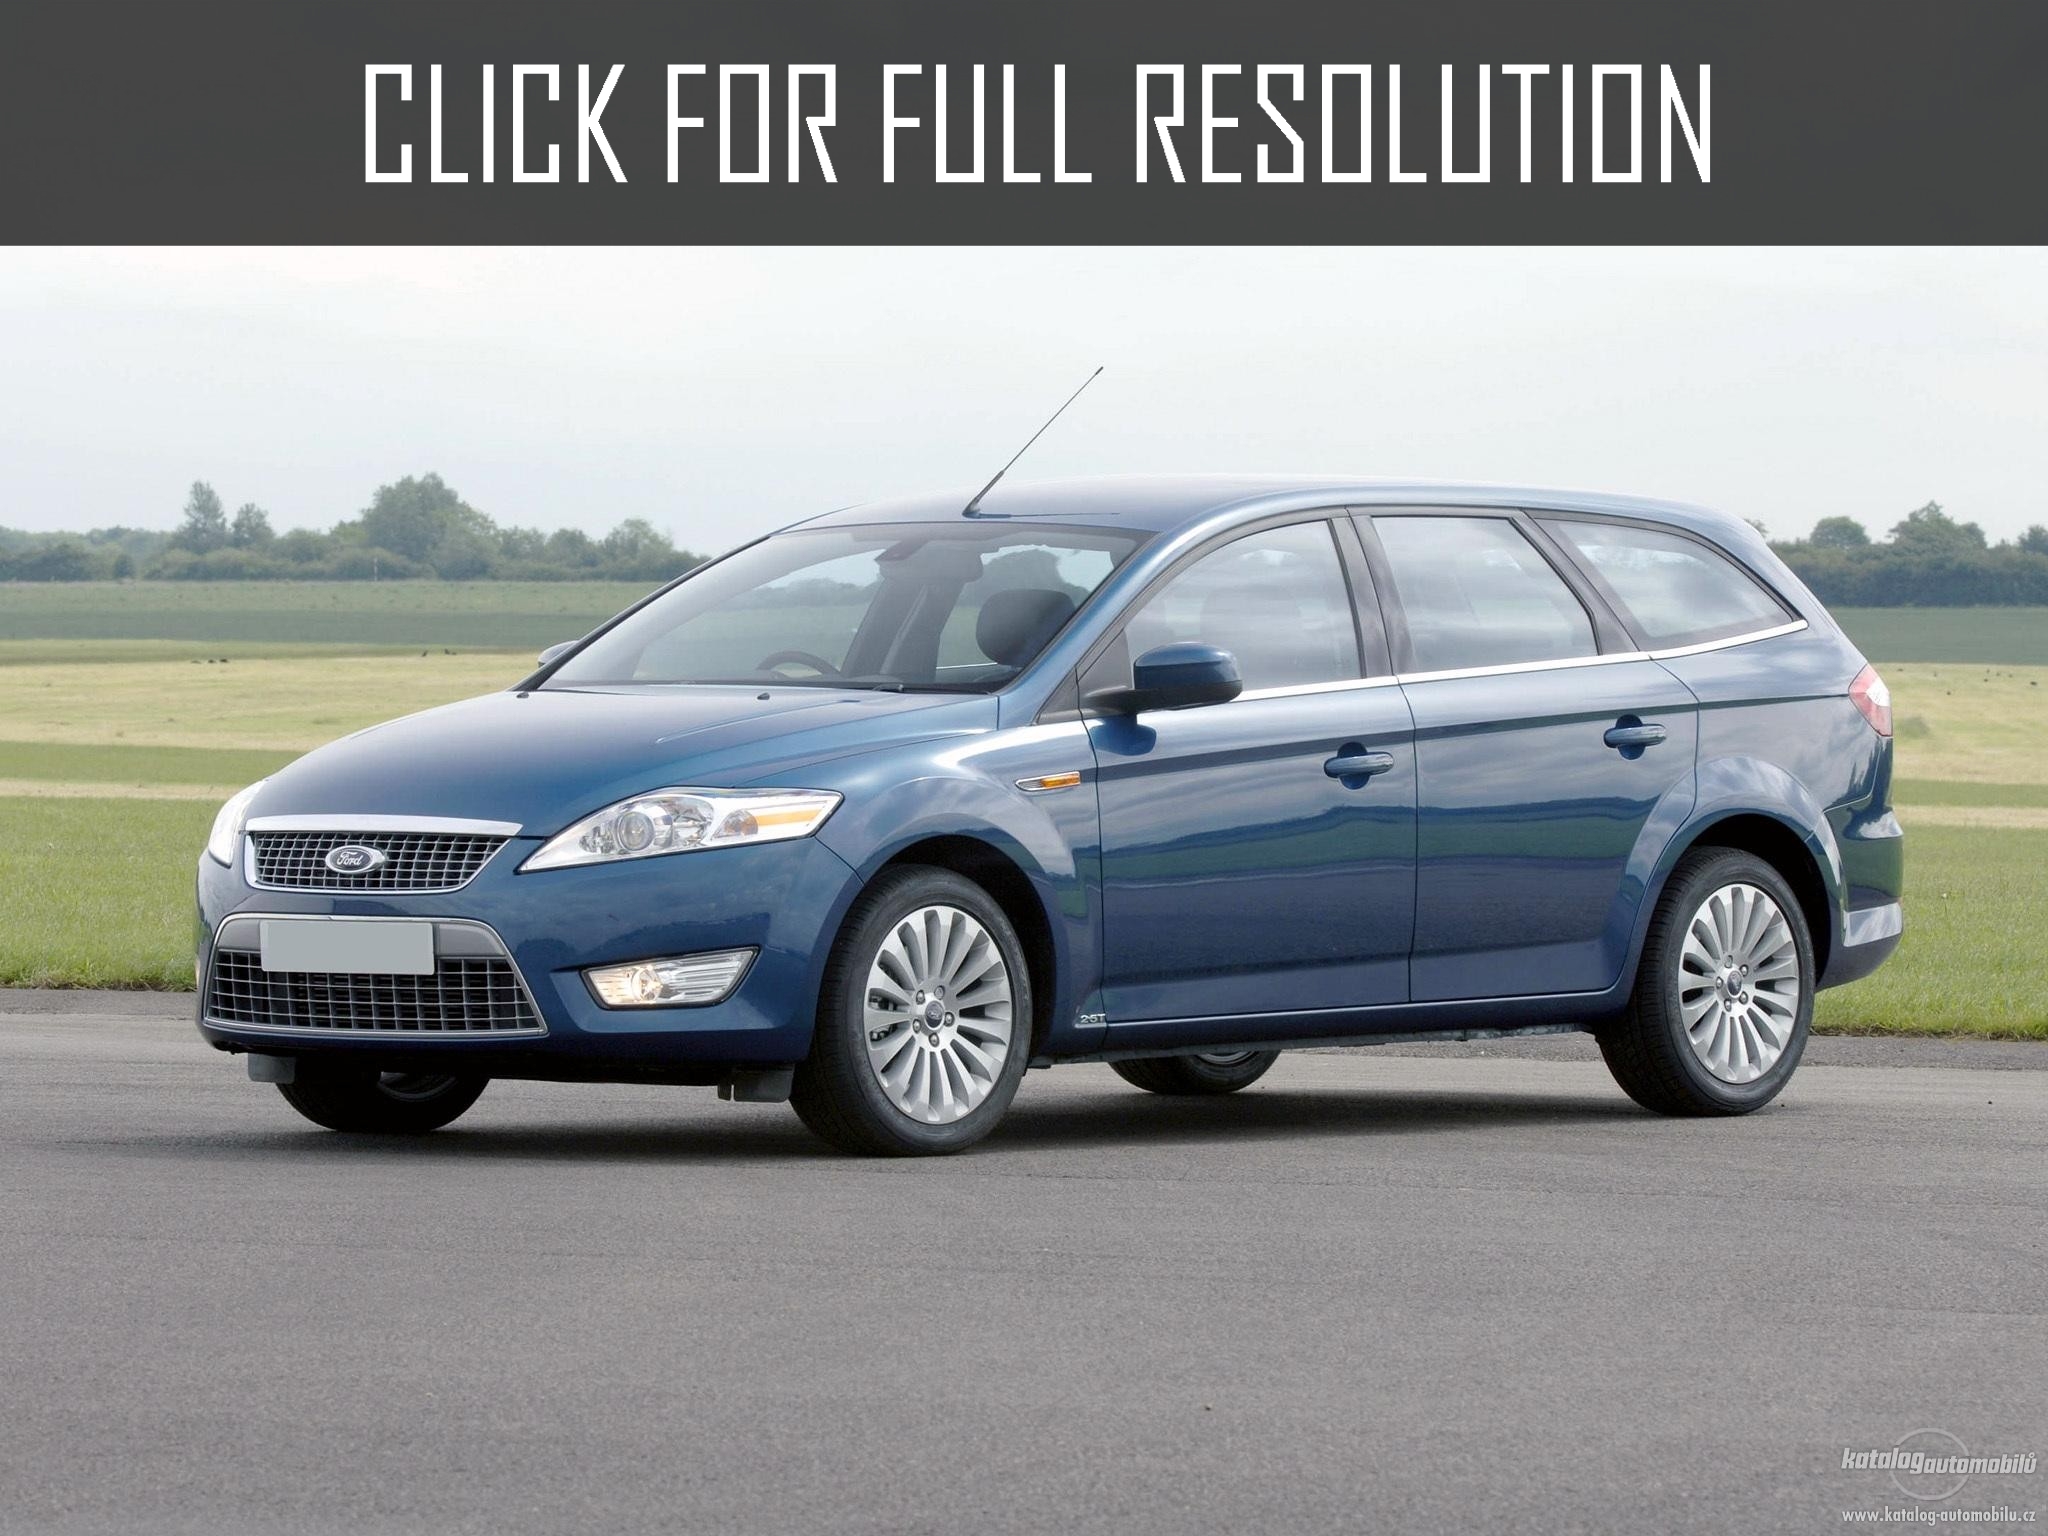 Ford Mondeo Combi